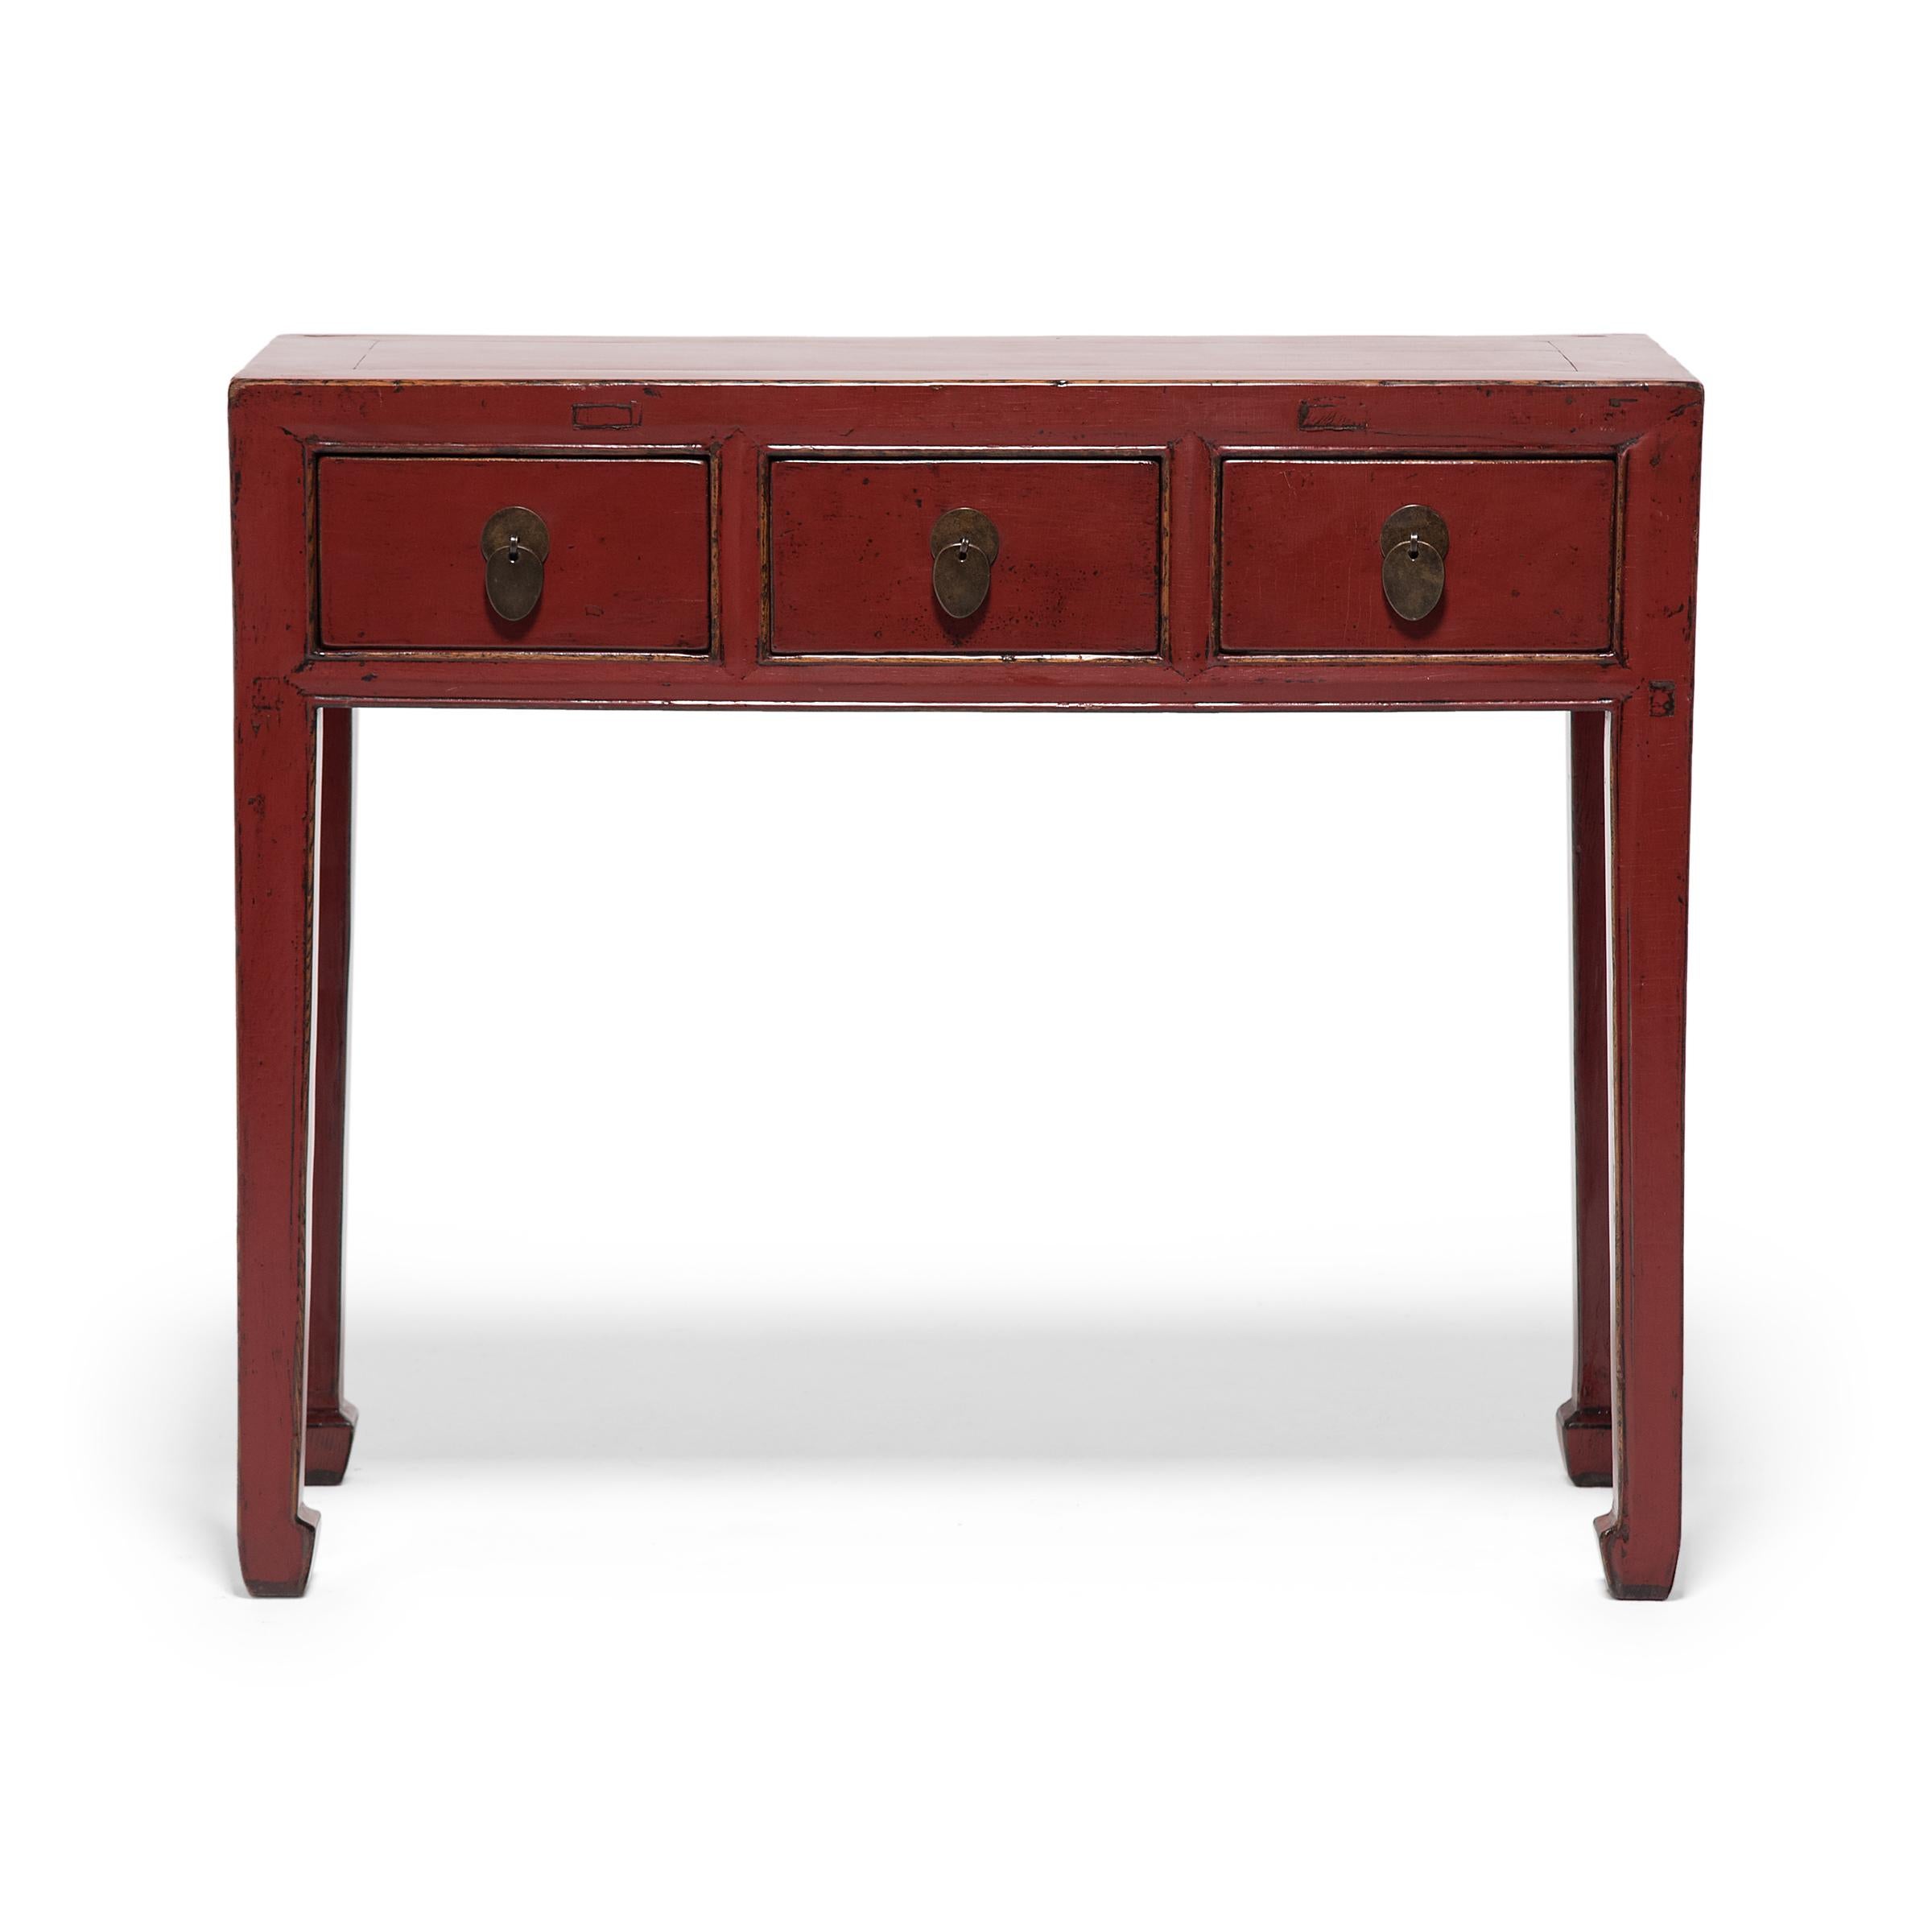 Dated to the early 20th century, this shallow console table was originally used for general storage or as an altar for burning incense during ancestor worship. The table has a simple design suitable for any interior, featuring a squared frame,